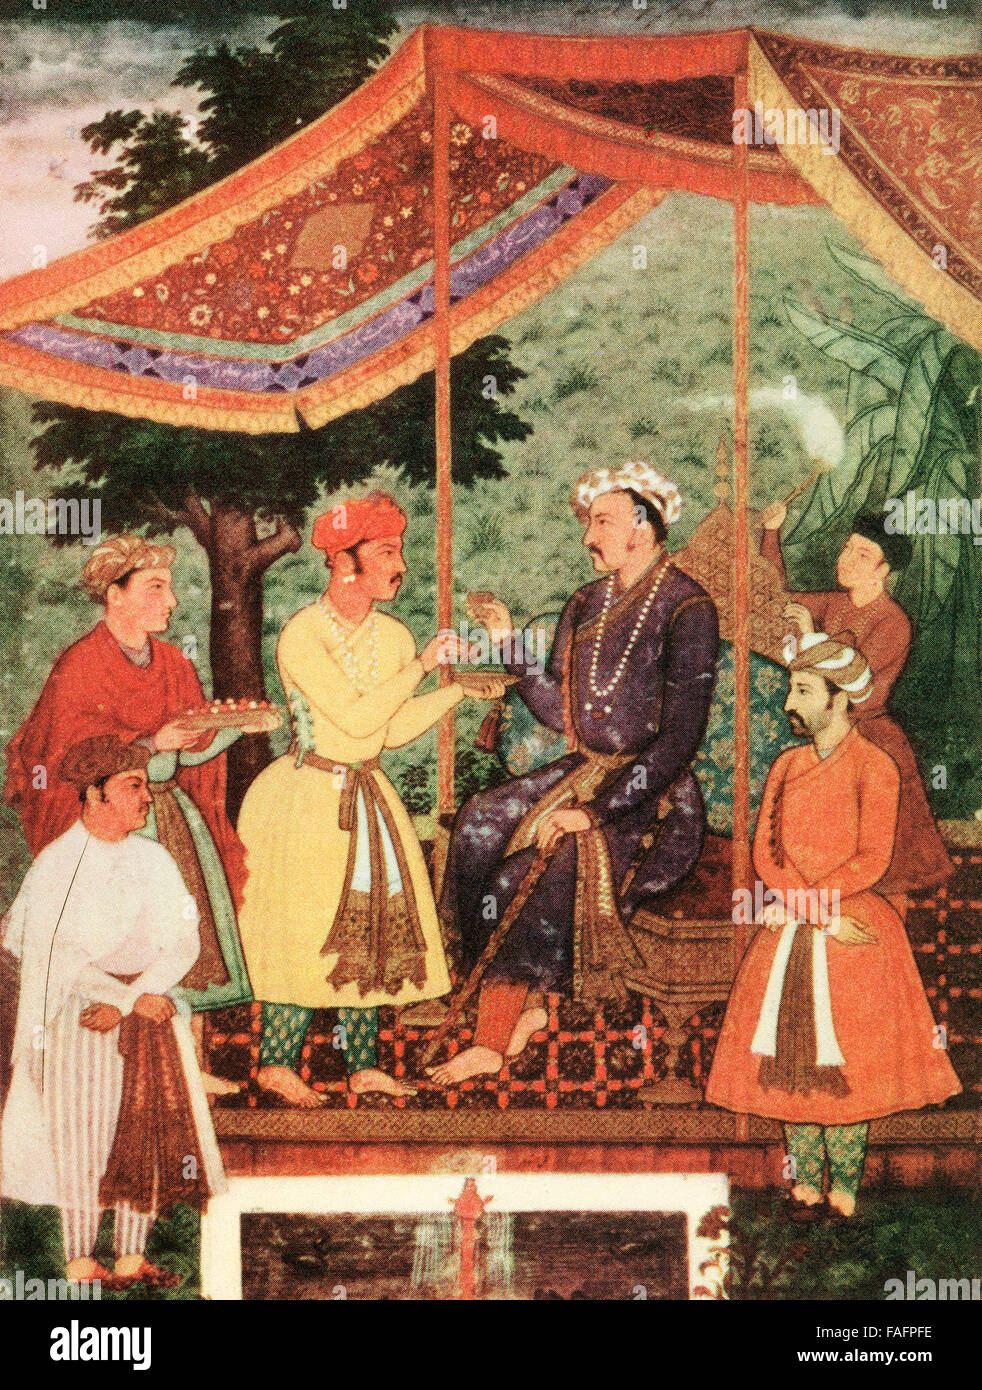 Nur-ud-din Mohammad Salim, known by his imperial name Jahangir, 1569 –1627.  Fourth Mughal Emperor. Depicted here drinking wine under a canopy.  After the painitng by Manohar. Stock Photo